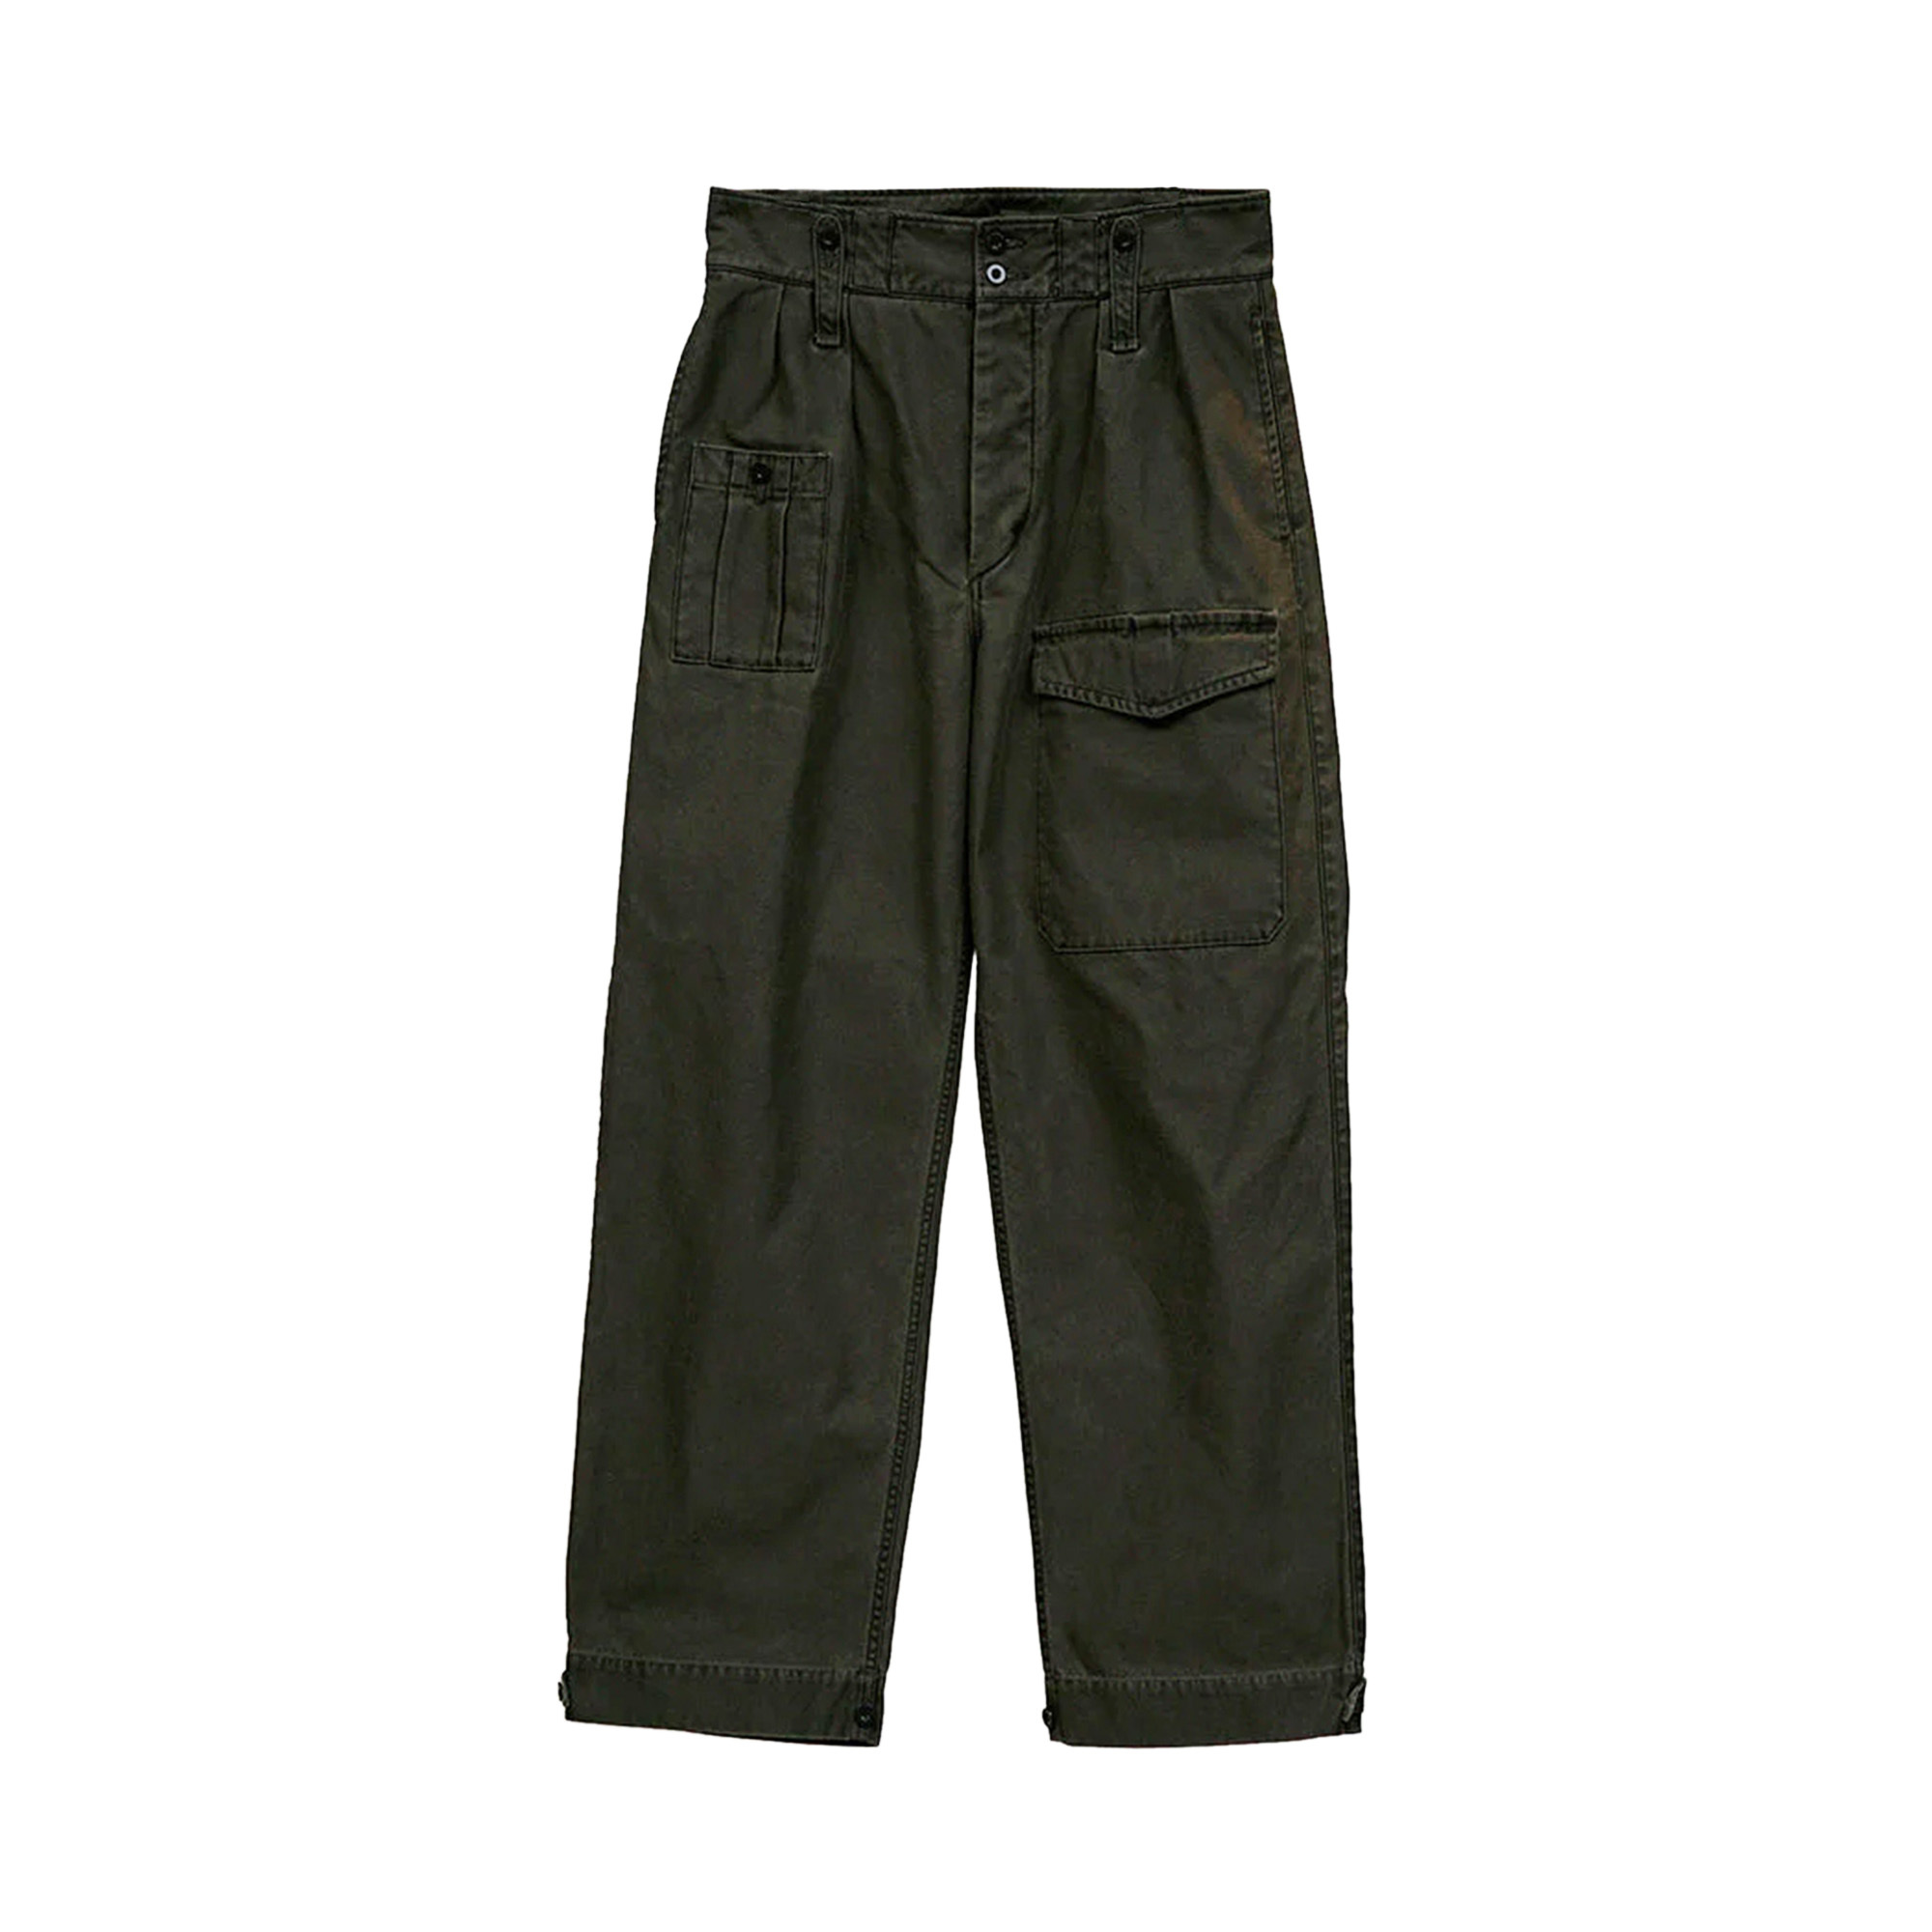 Nigel Cabourn - British Army Pant Pealing Print (Charco